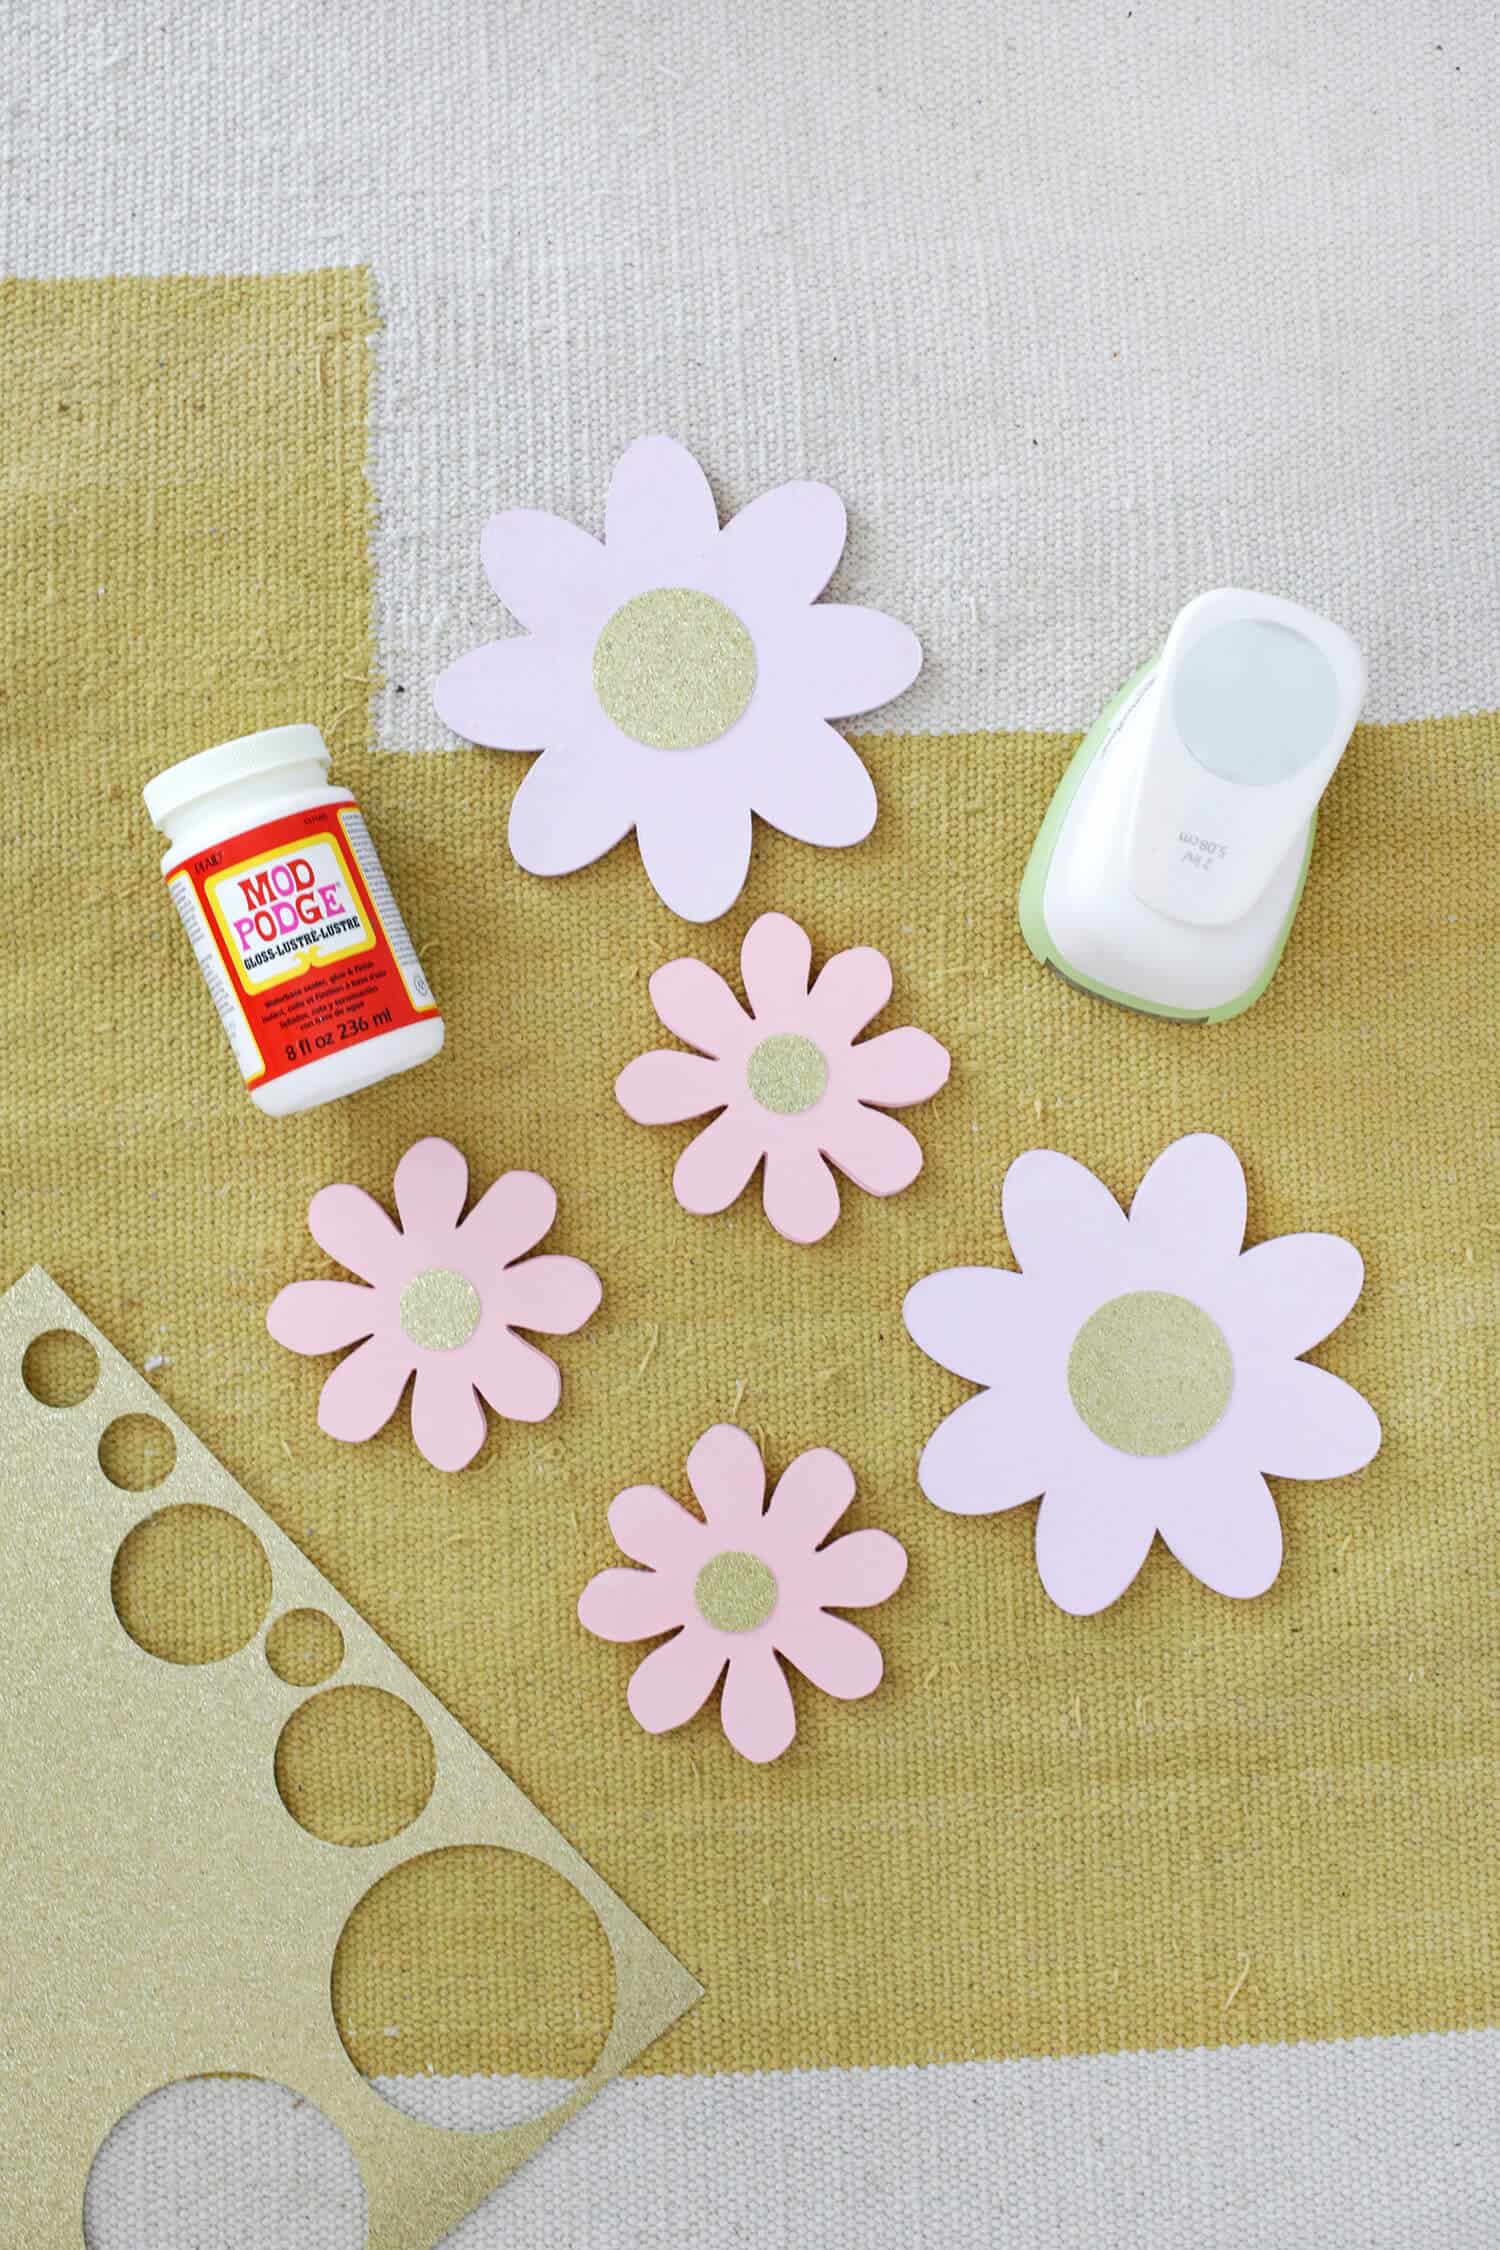 5 painted wooden flowers with mod podge and a circle cutter next to them